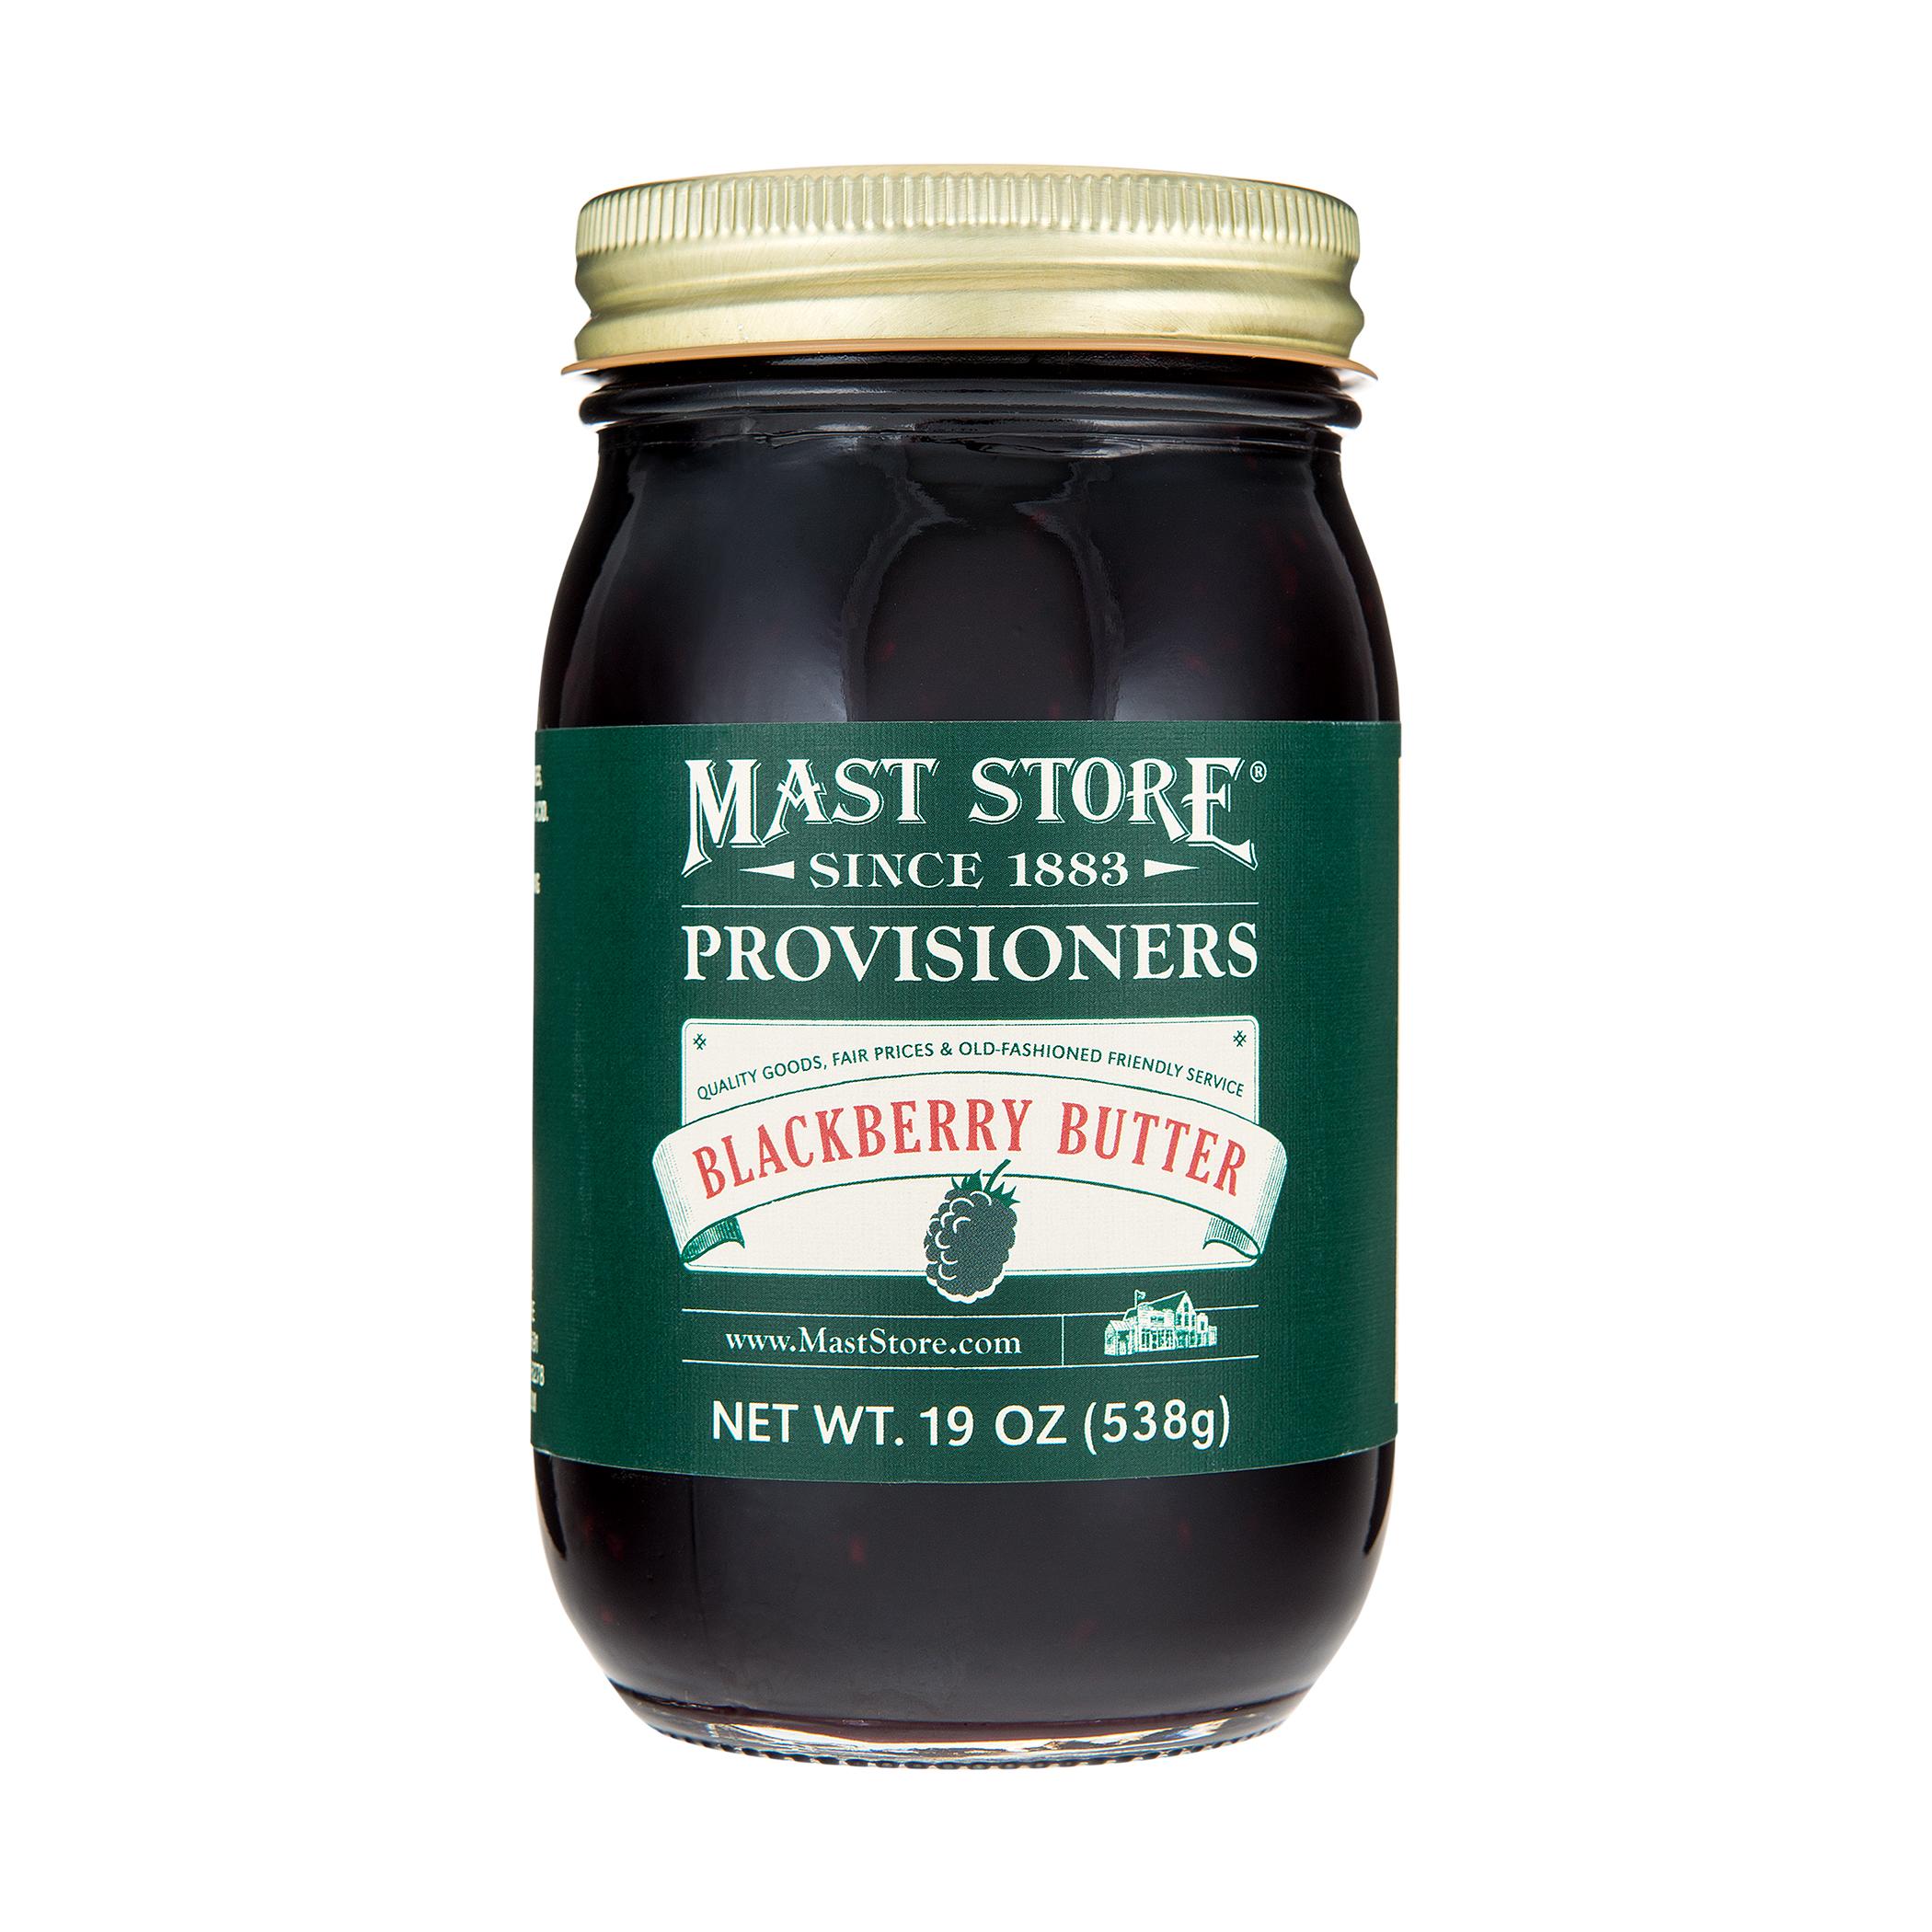  Mast Store Provisioners Blackberry Butter